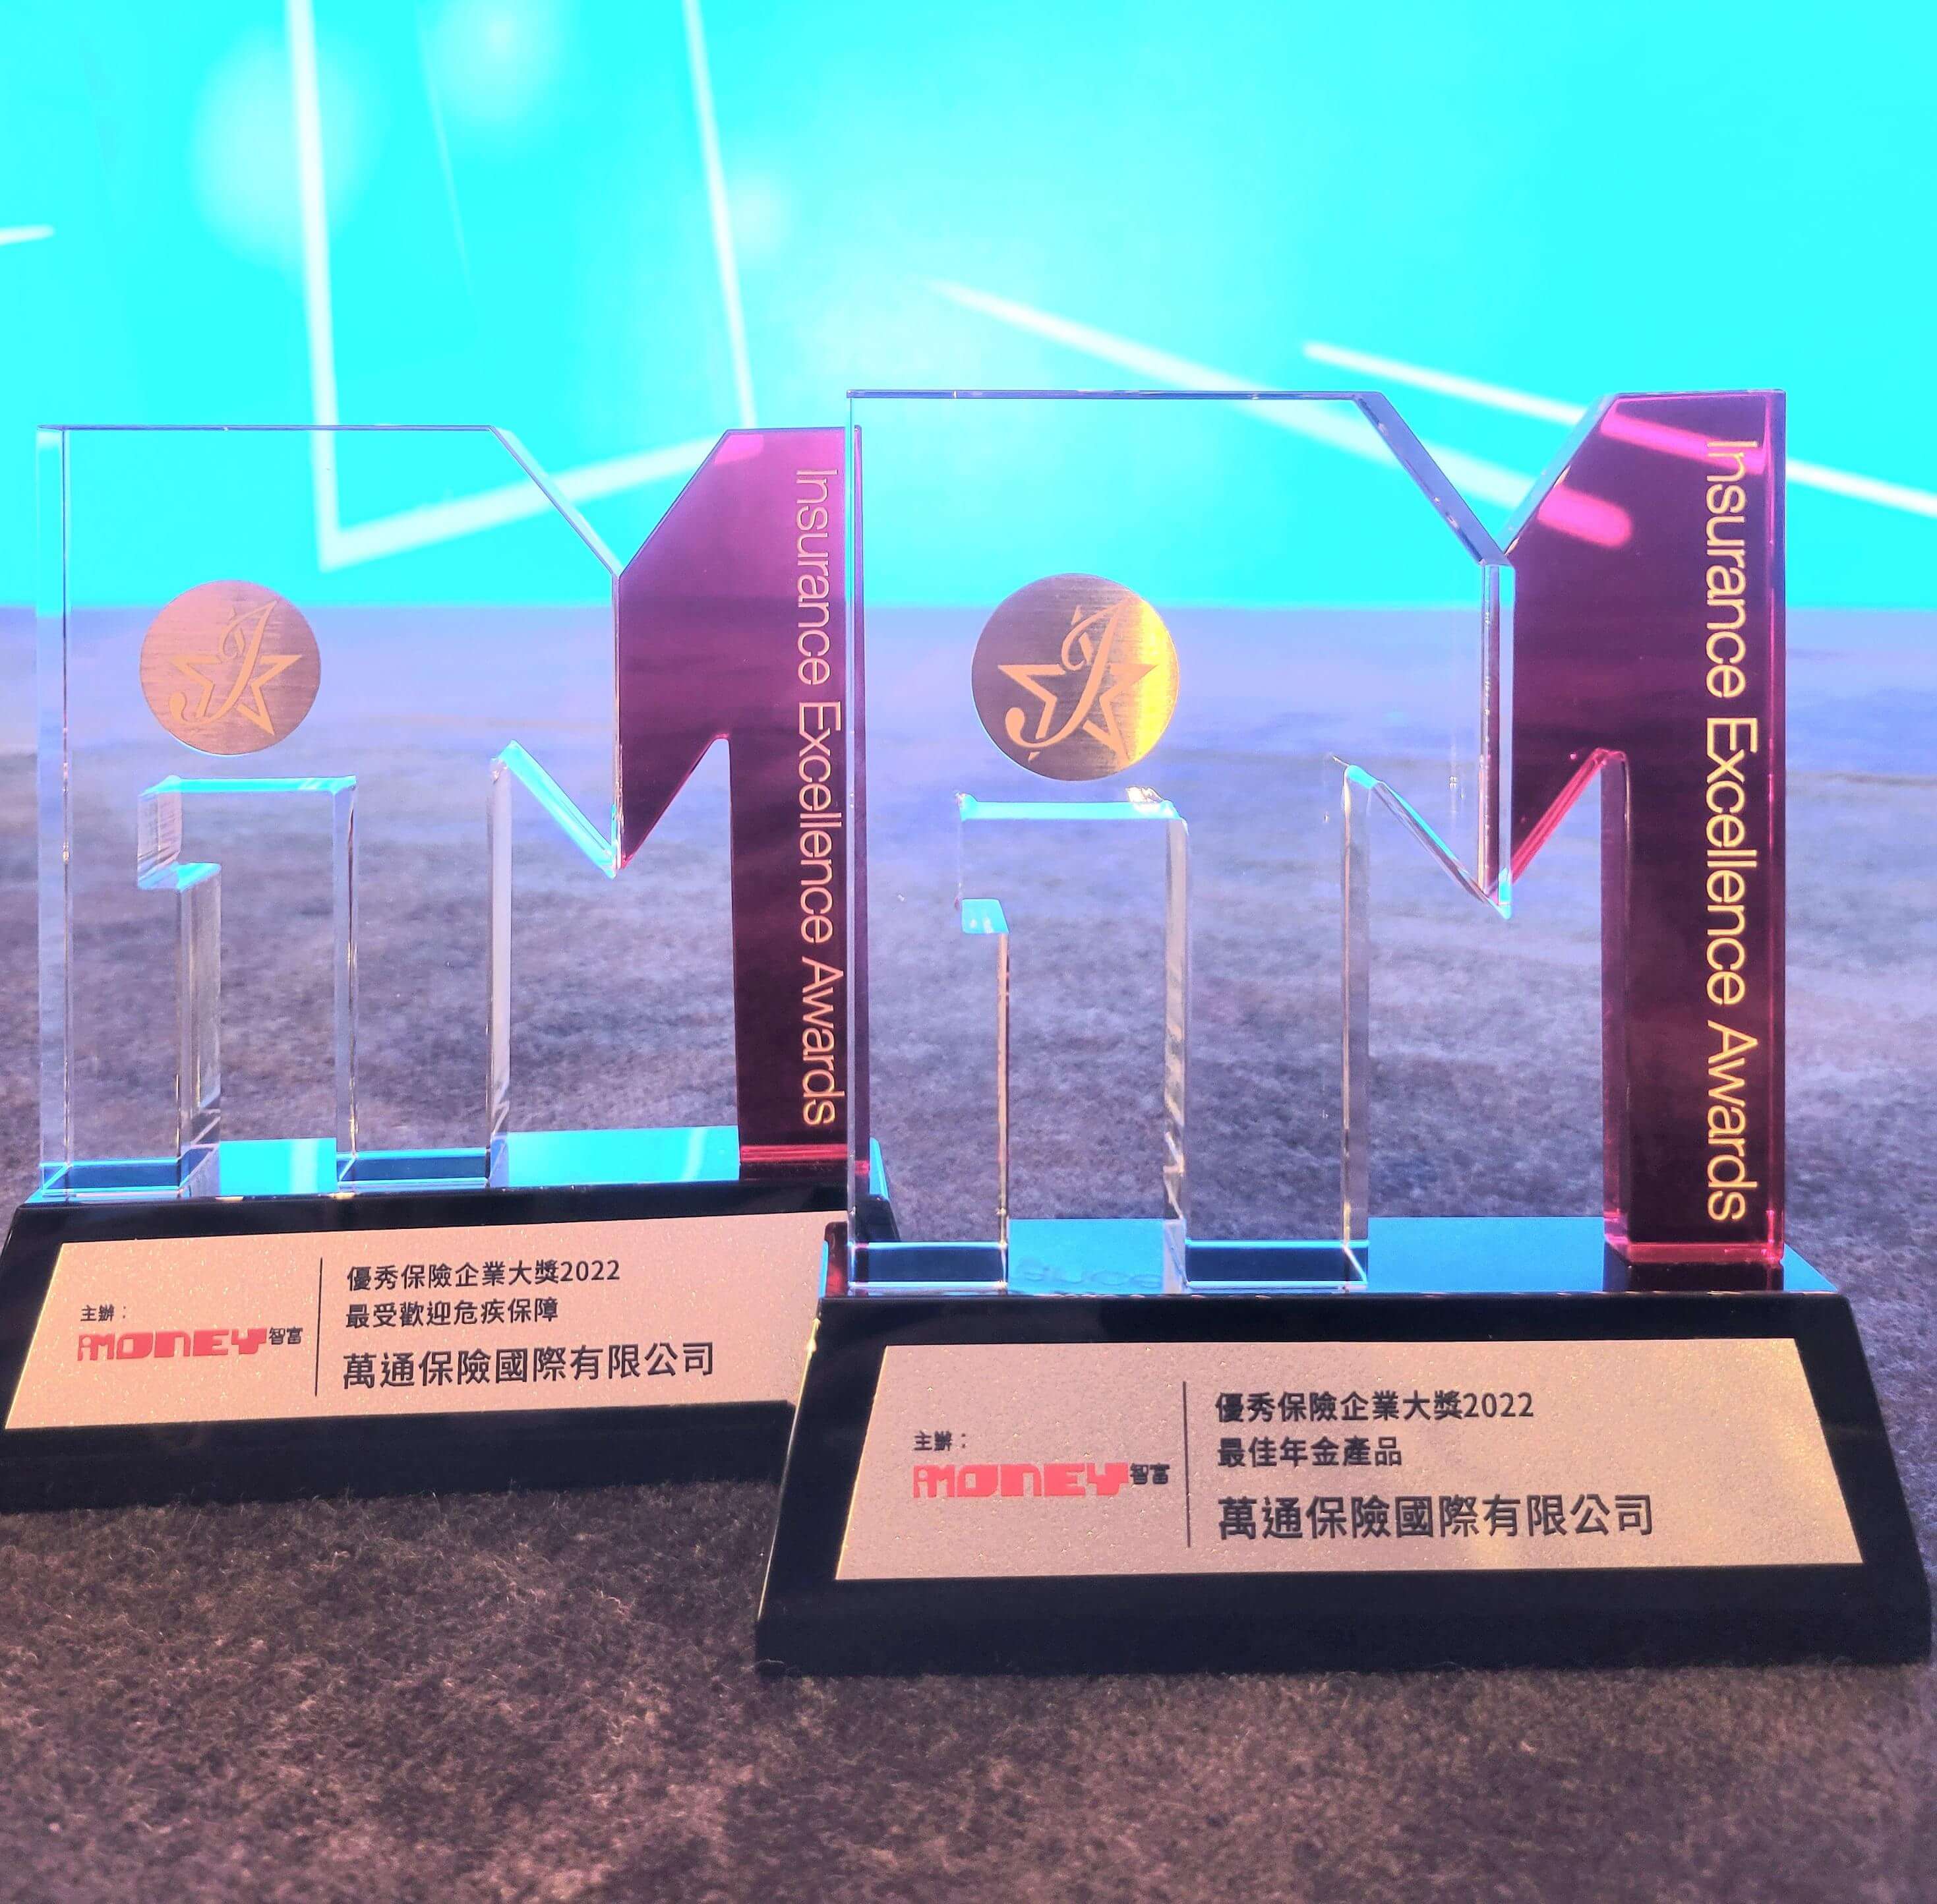 YF Life has won the “Best Annuity Product” award for 5 consecutive years, and the “Most Popular Critical Illness Insurance Product” award for 3 consecutive years.